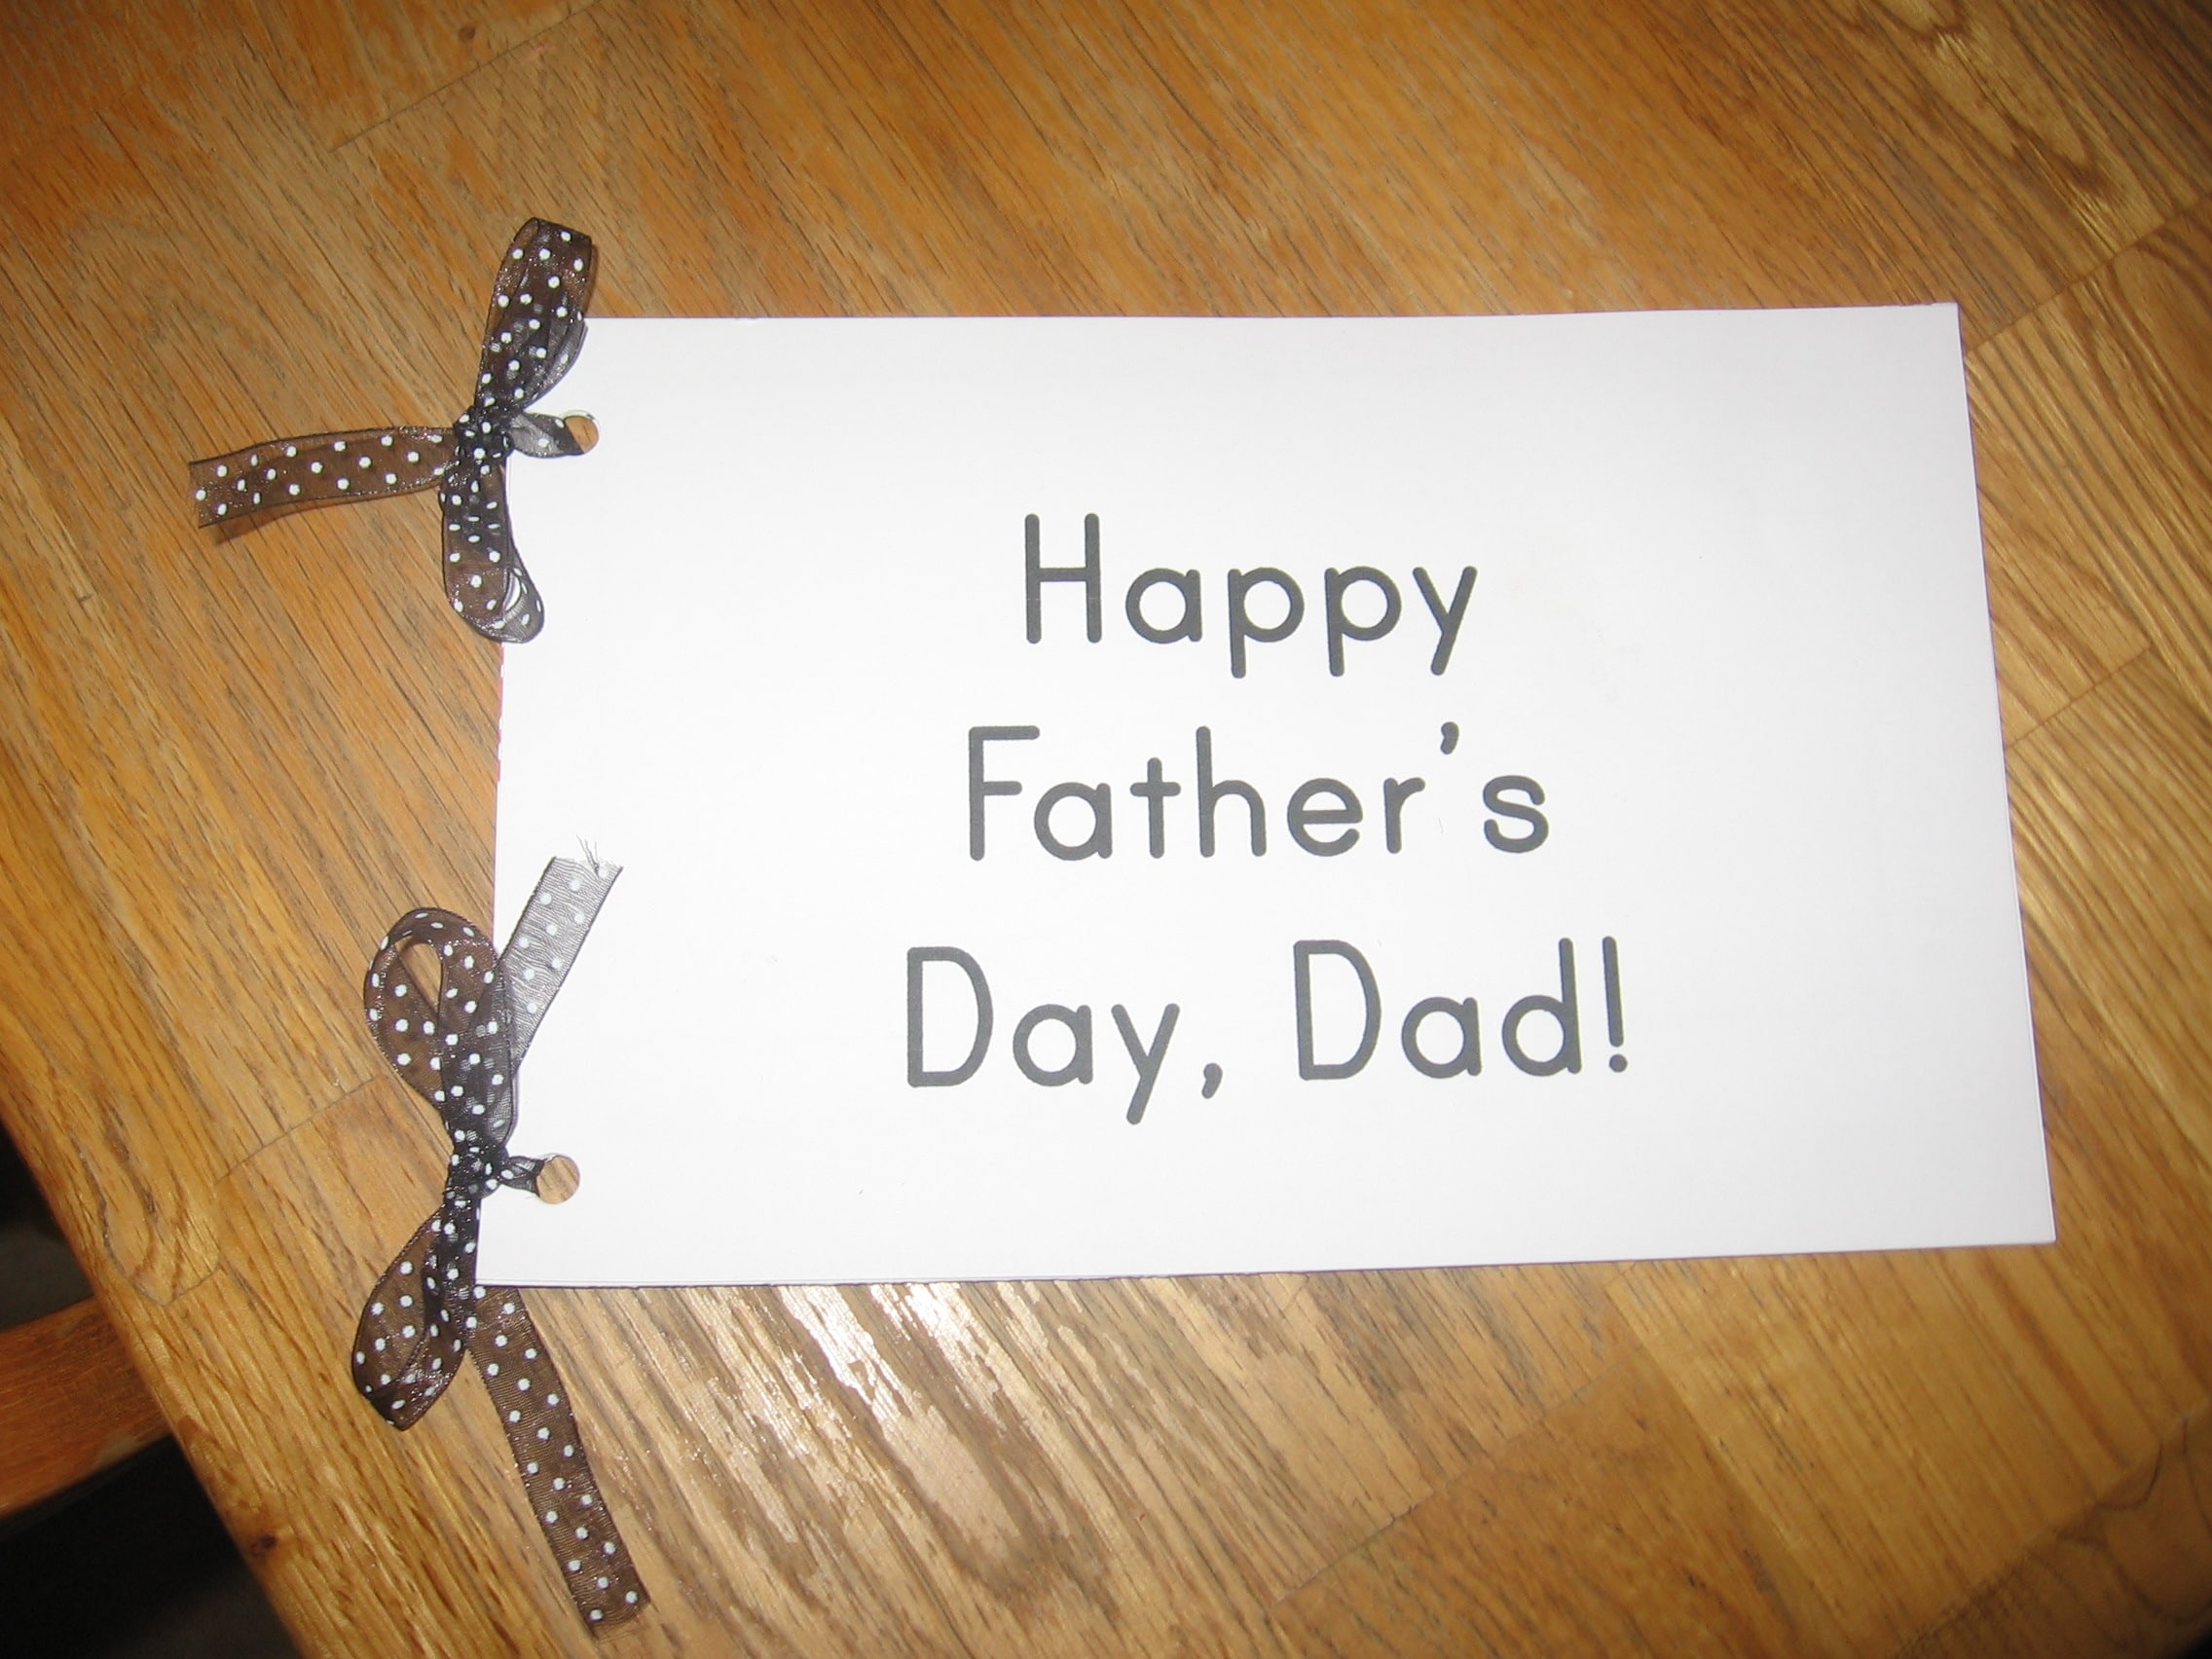 14 DIY Father's Day gifts kids can make - Care.com Resources